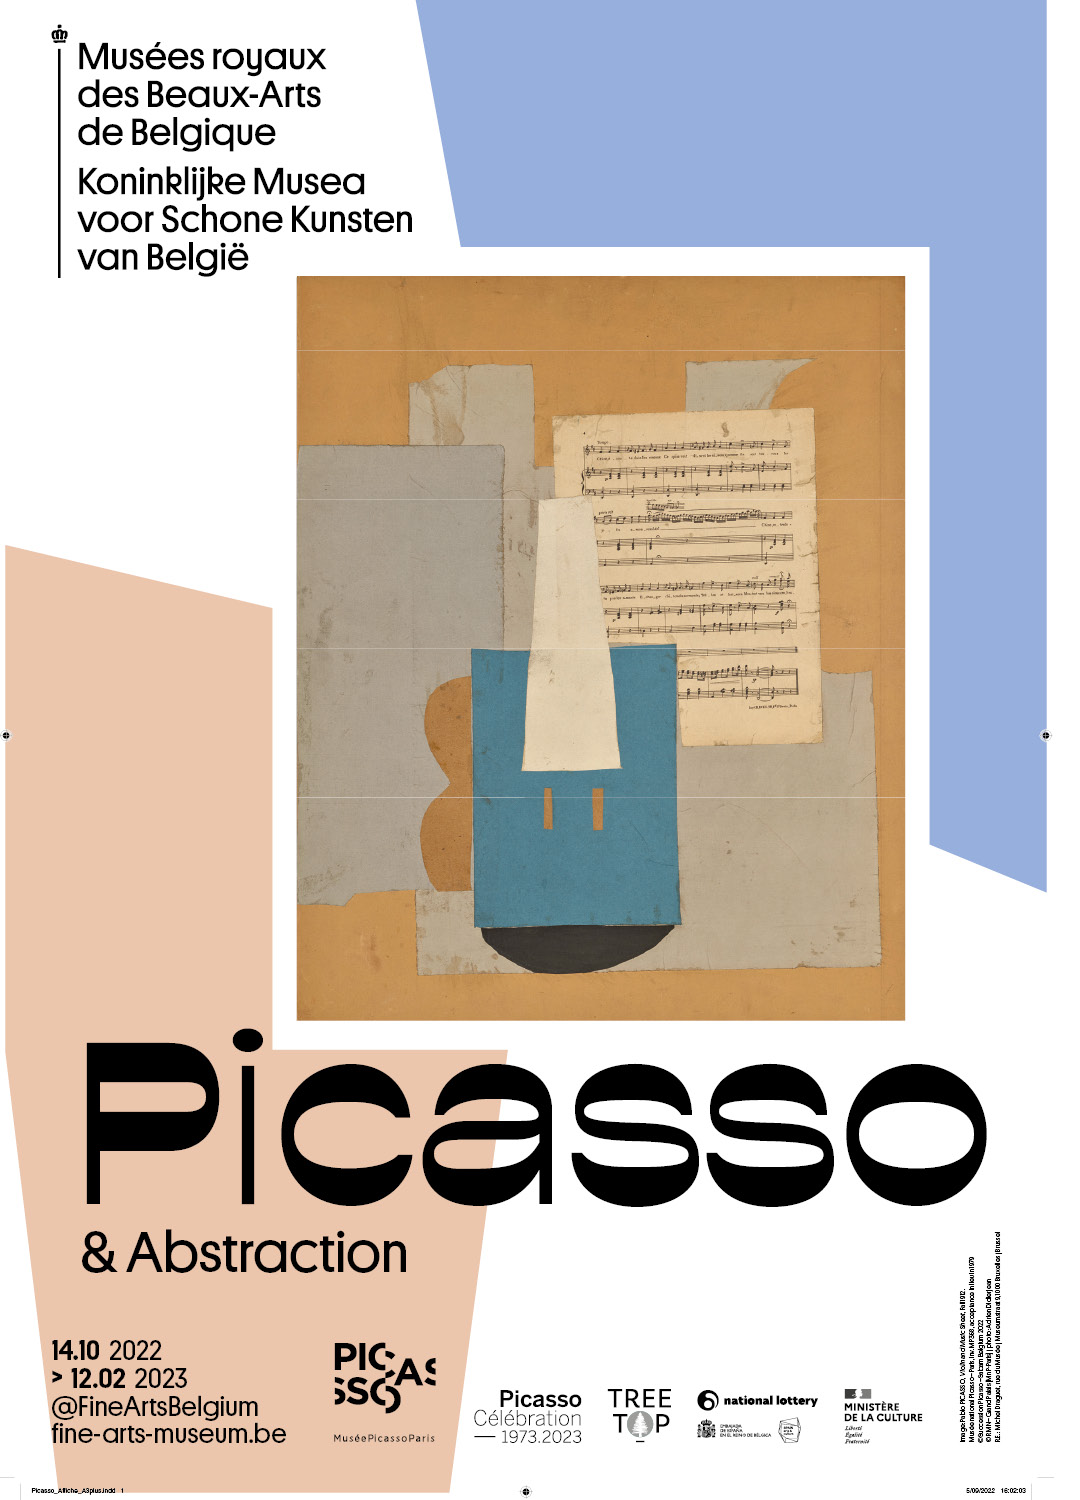 Picasso et l'abstraction 